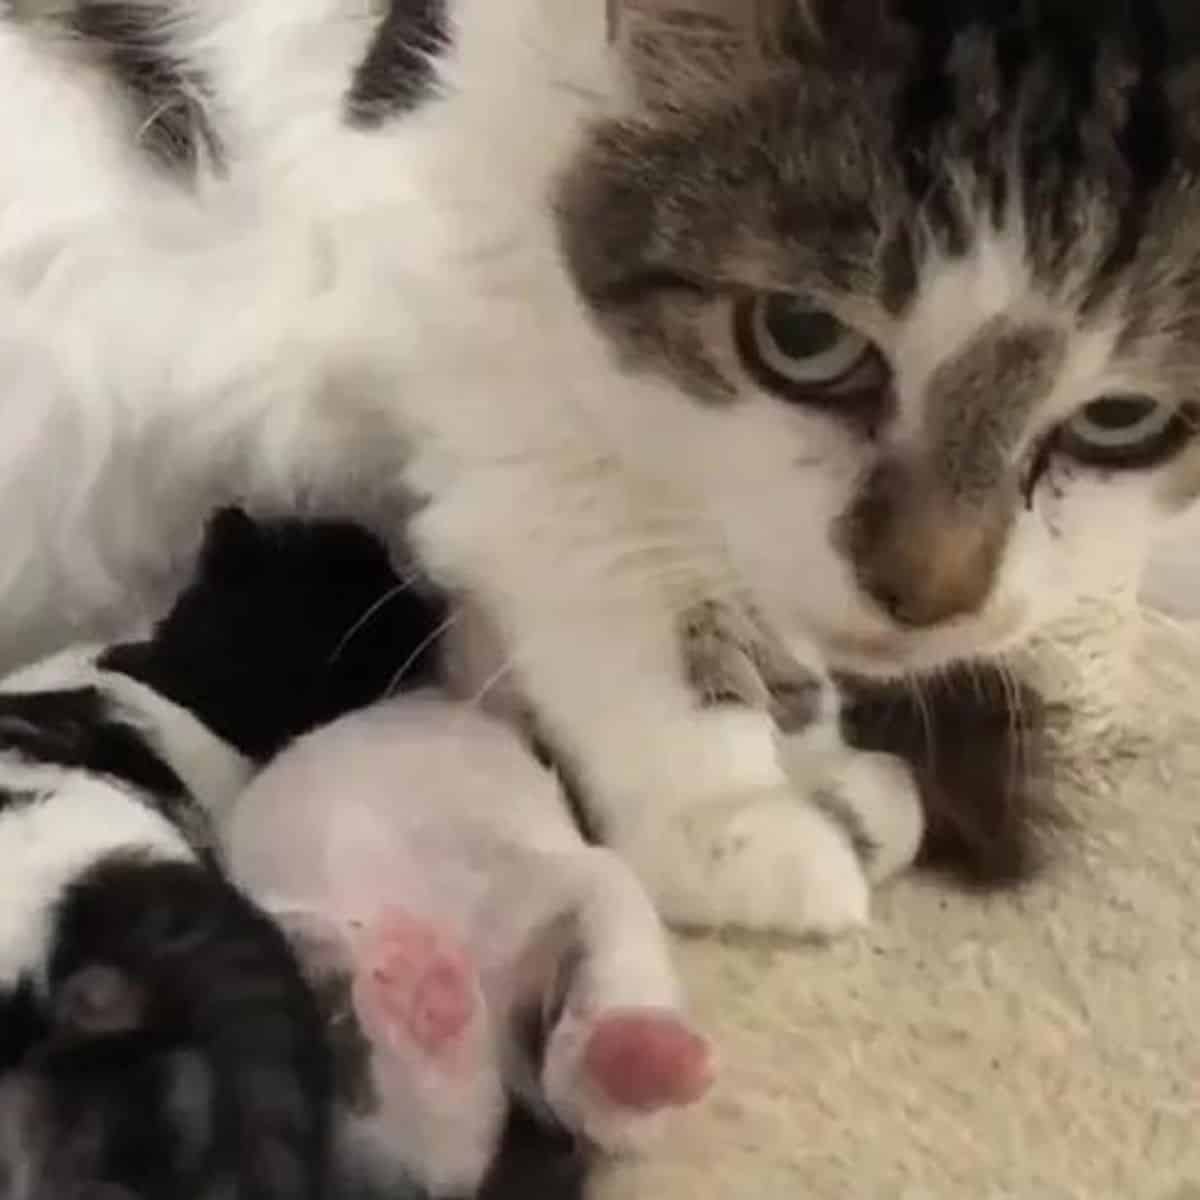 the cat looks after her kittens